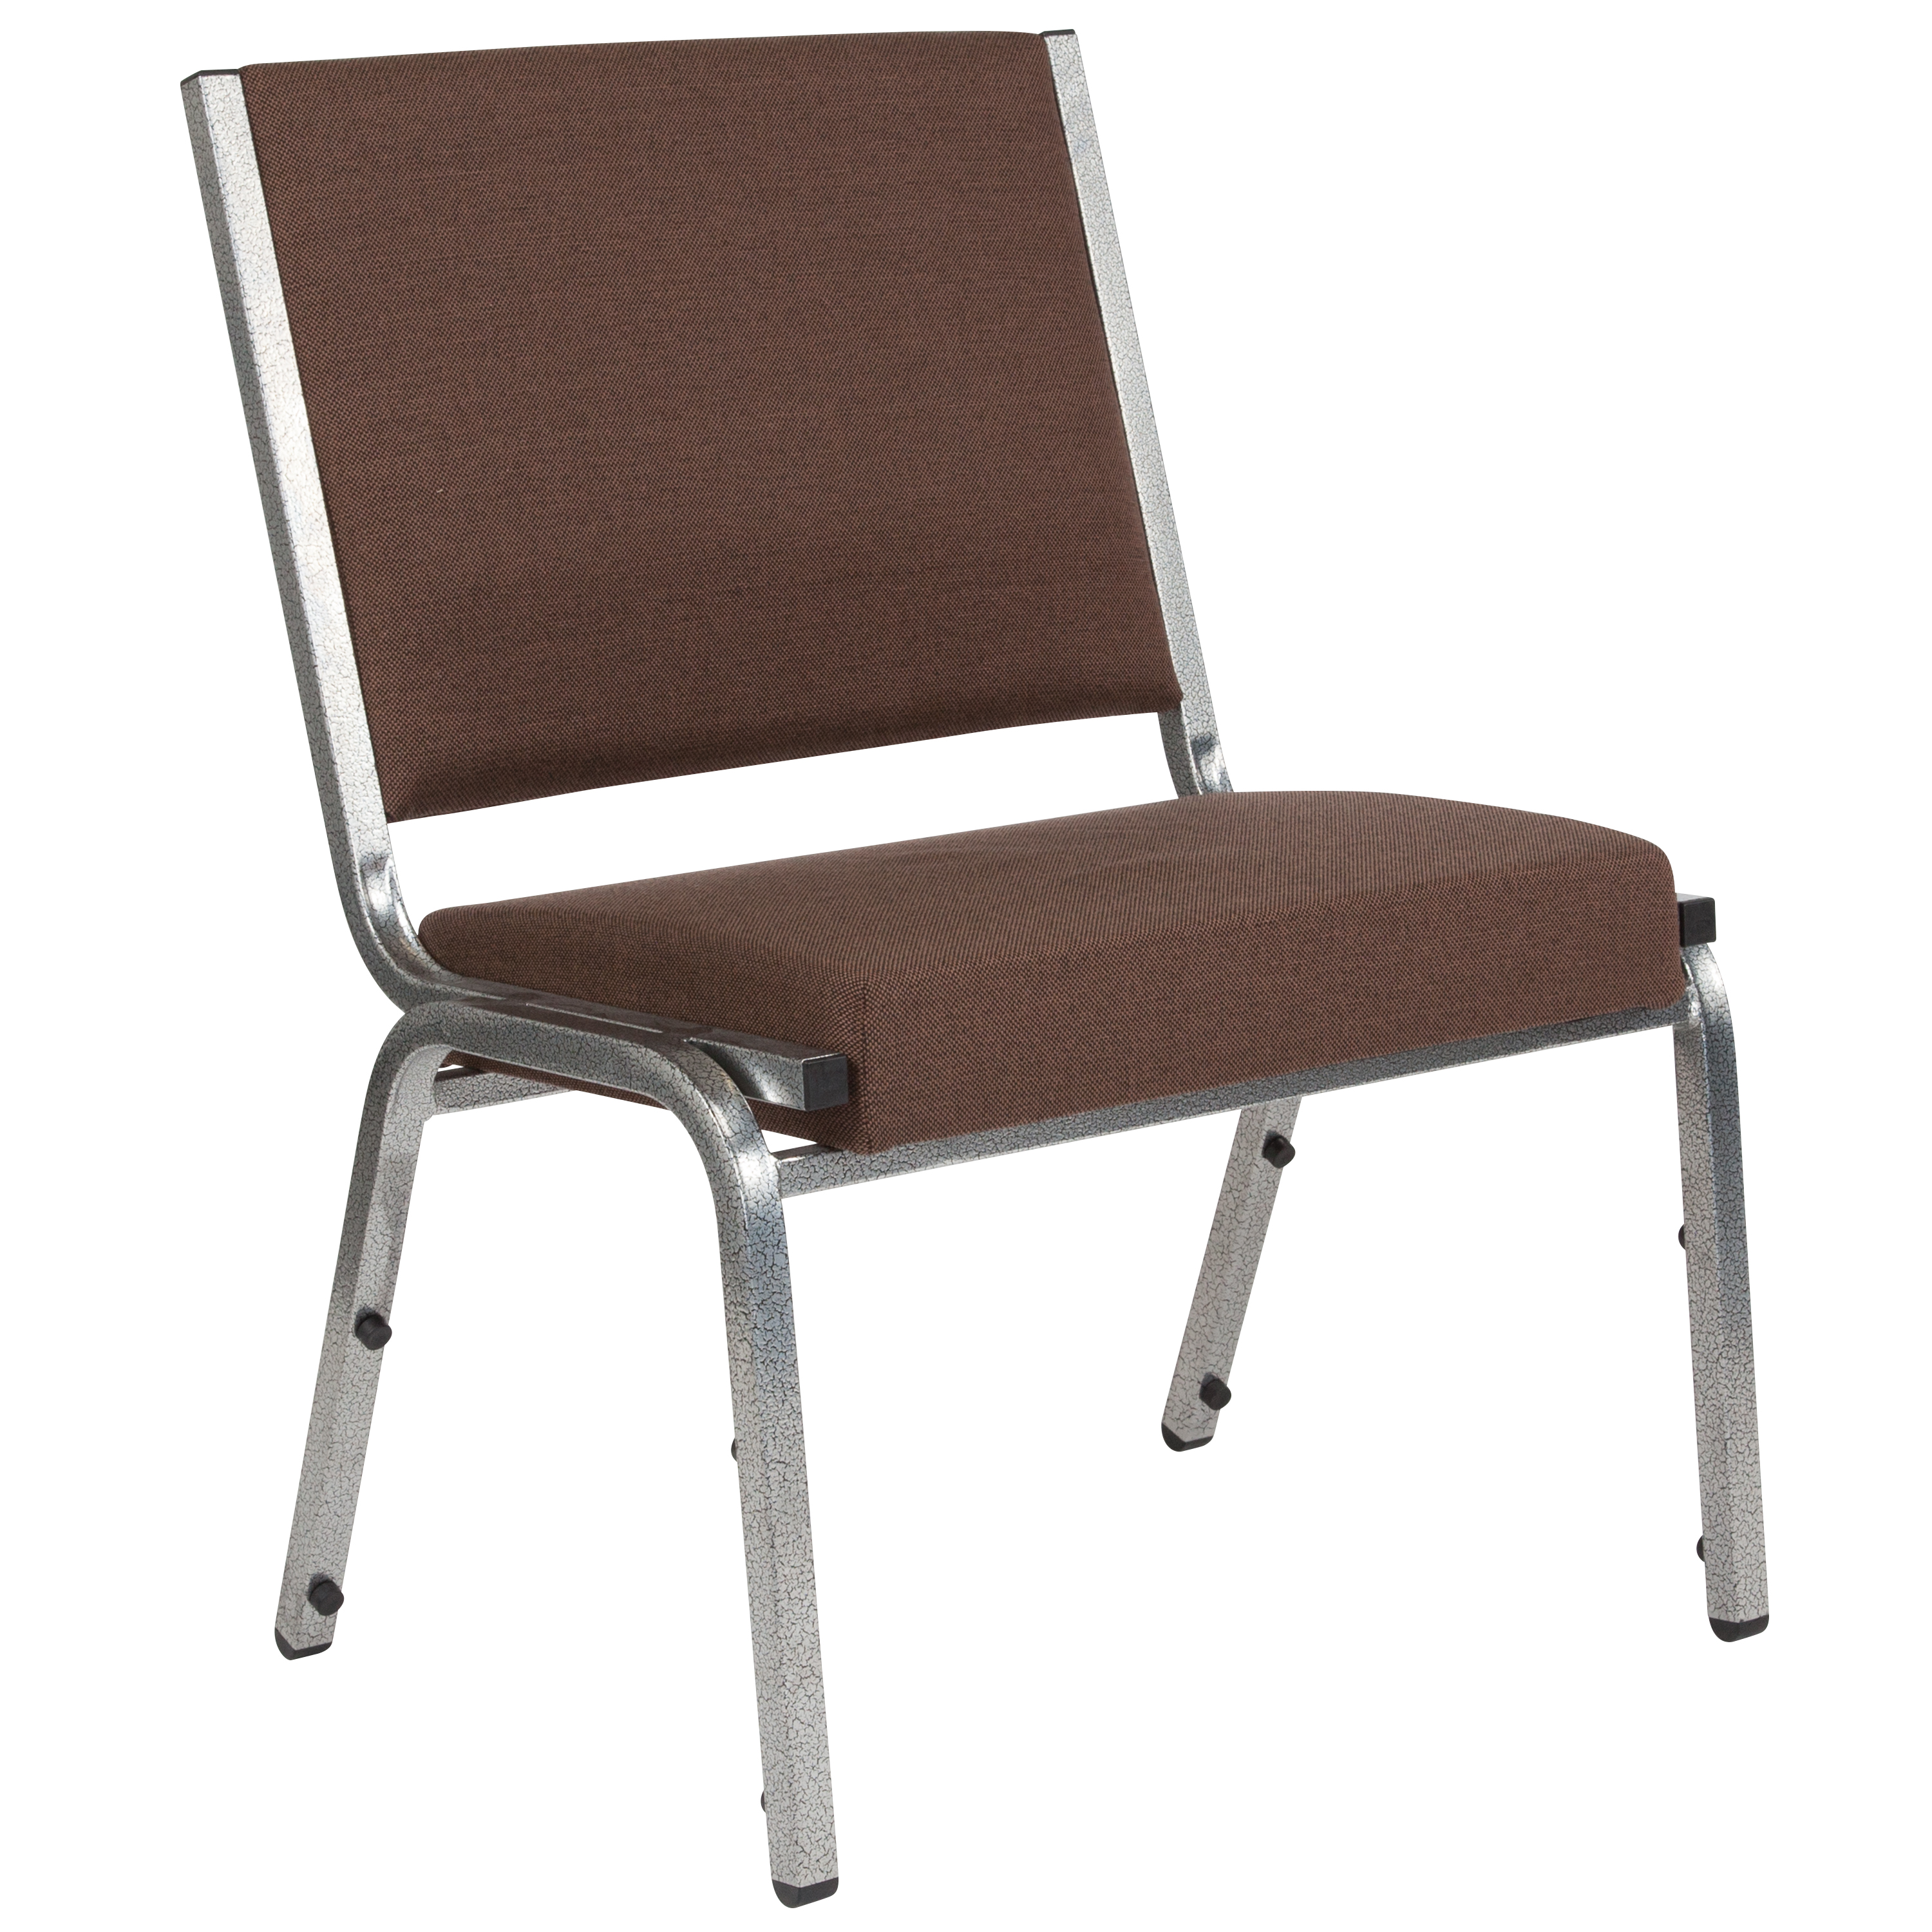 Flash Furniture HERCULES Series 1000 lb. Rated Brown Antimicrobial Fabric Bariatric Medical Reception Chair - image 1 of 6